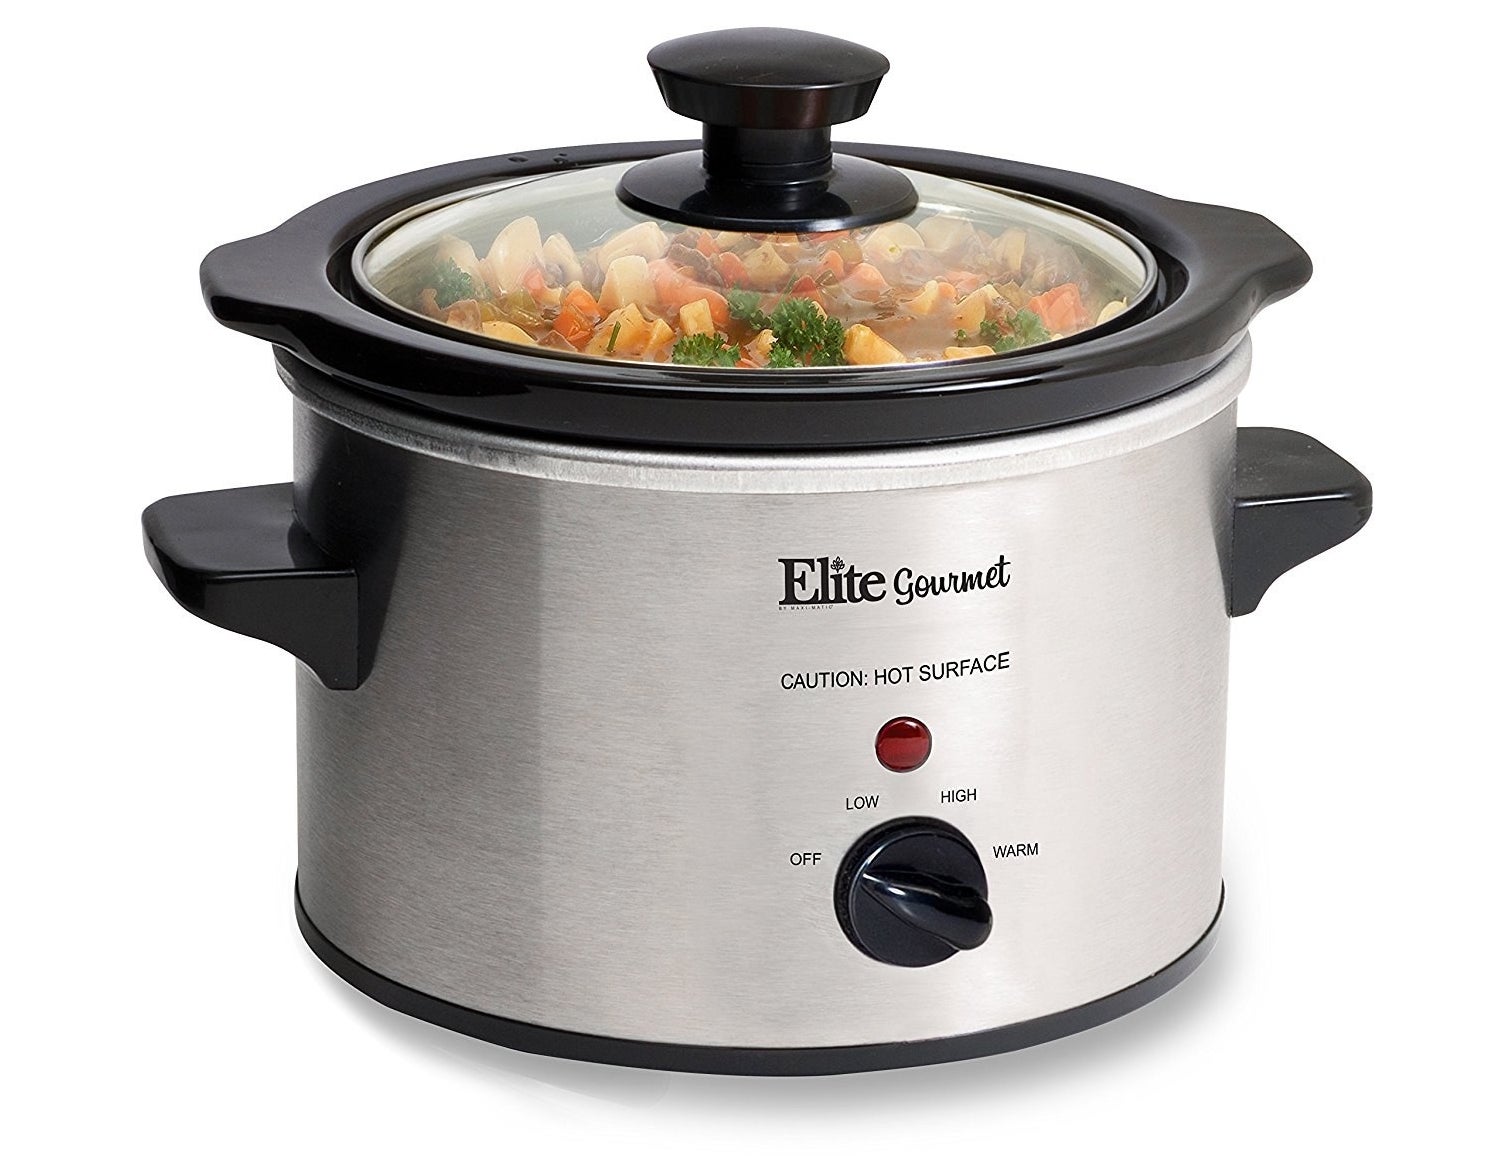 The slow cooker in silver, featuring black handles and a glass lid